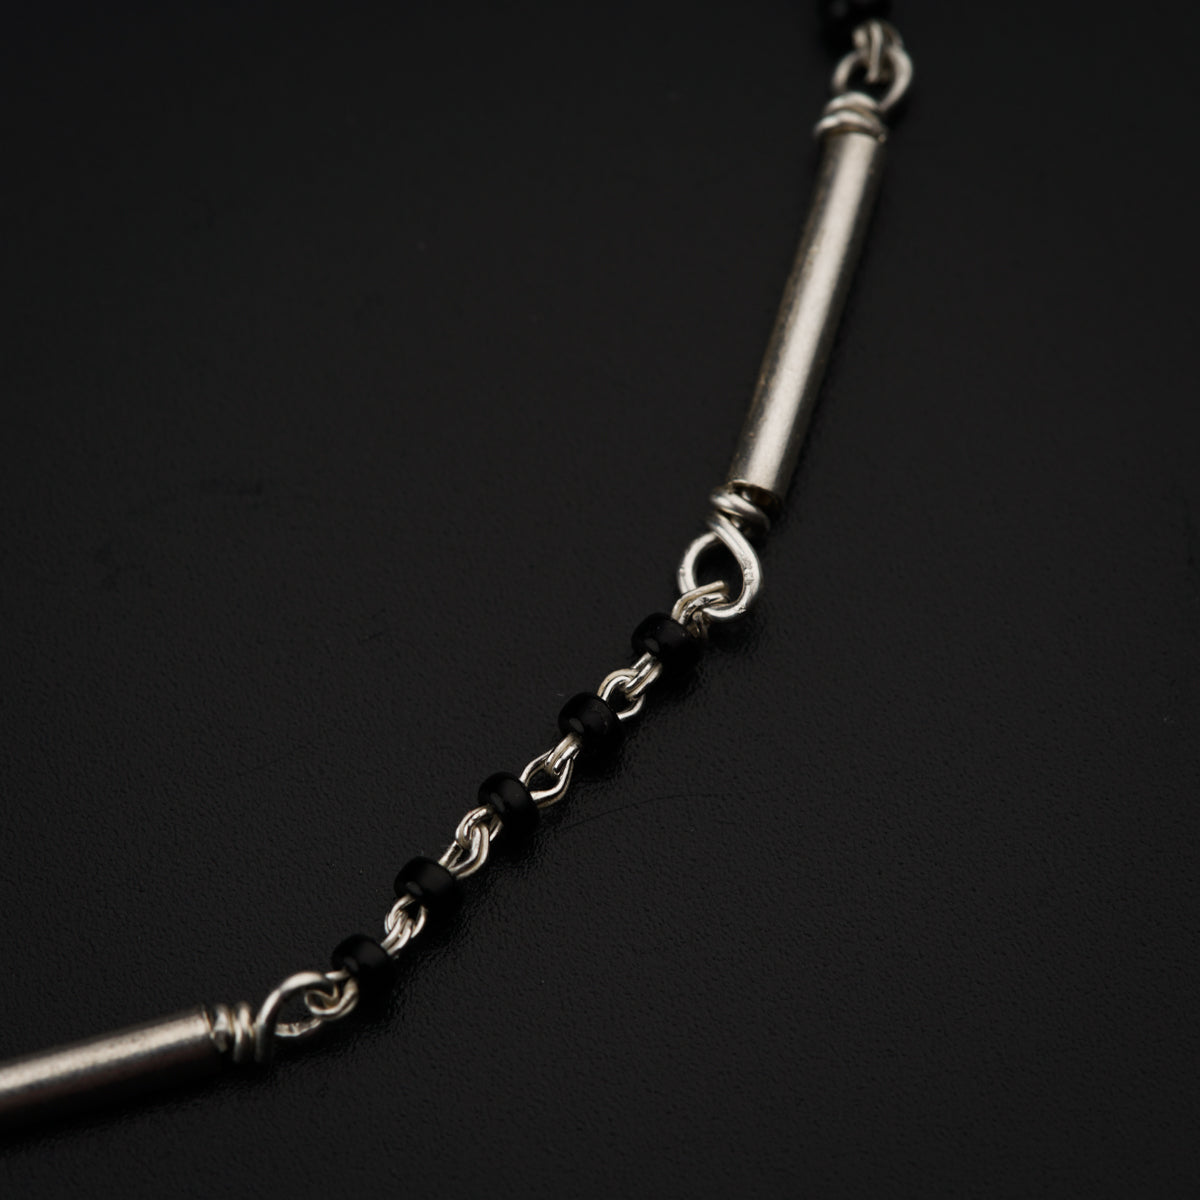 Handmade Silver Mangalsutra Bracelet with Pipe and Black Spinel